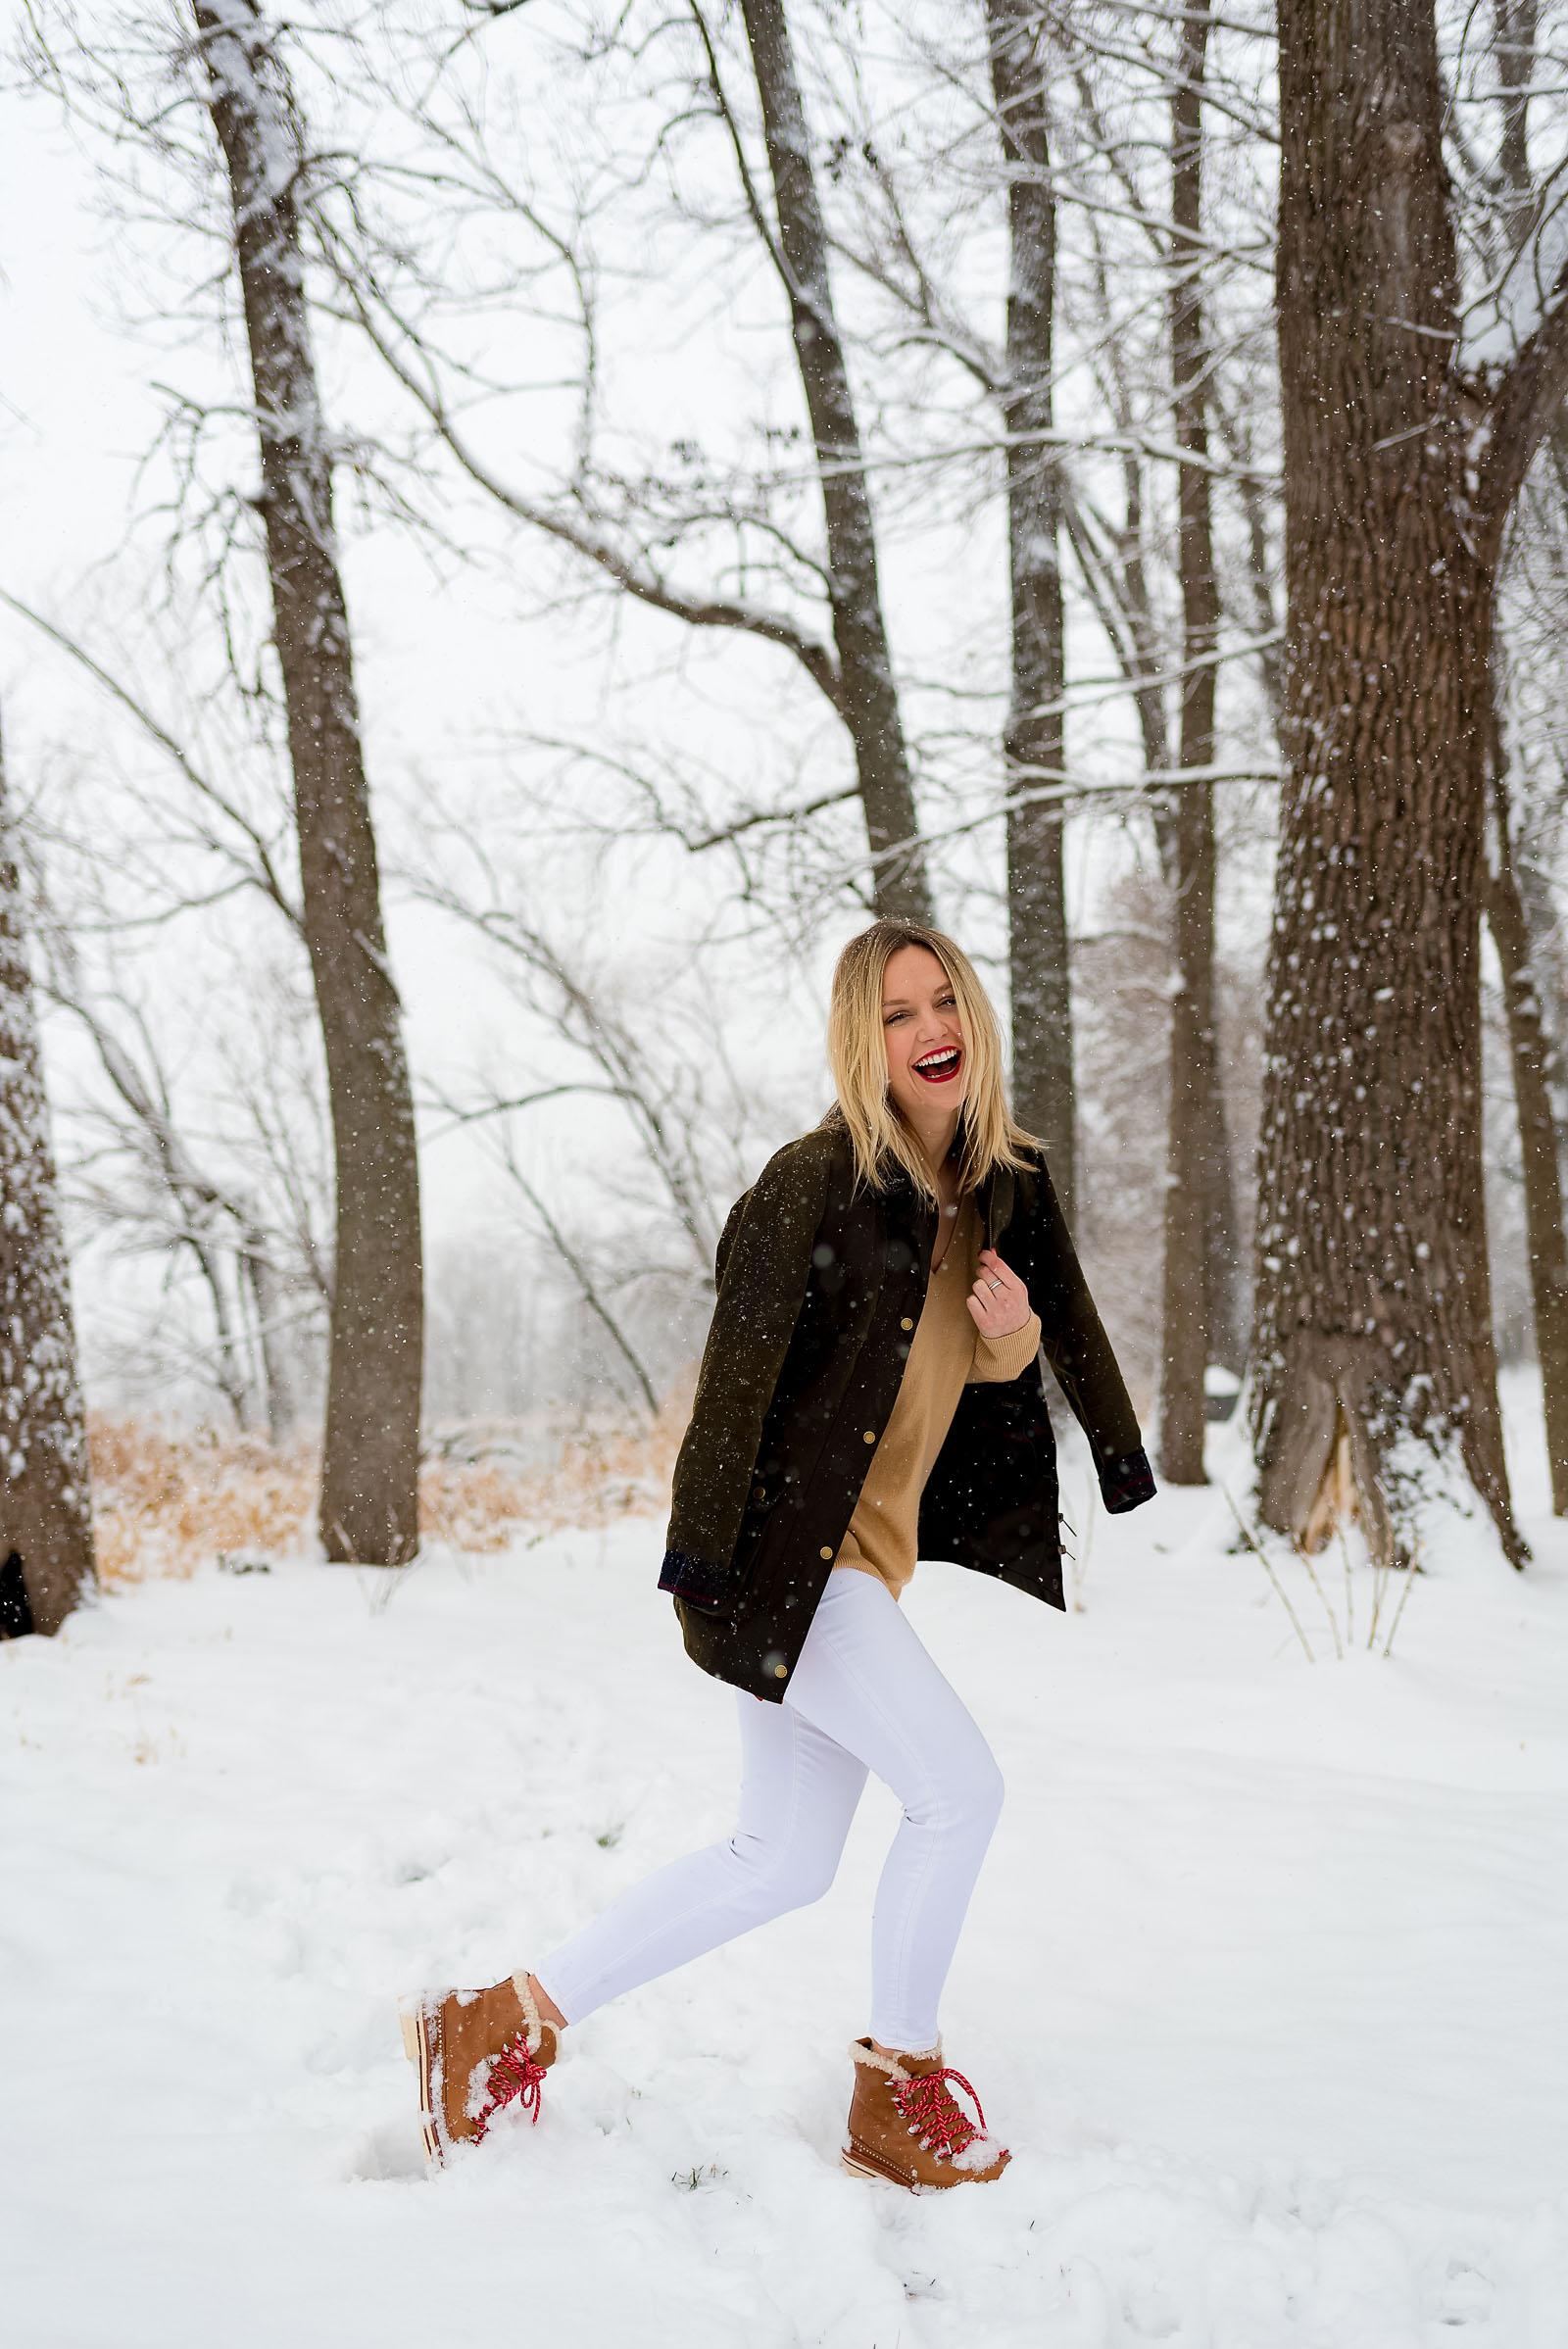 Winter Outfit Ideas for Snowy Days